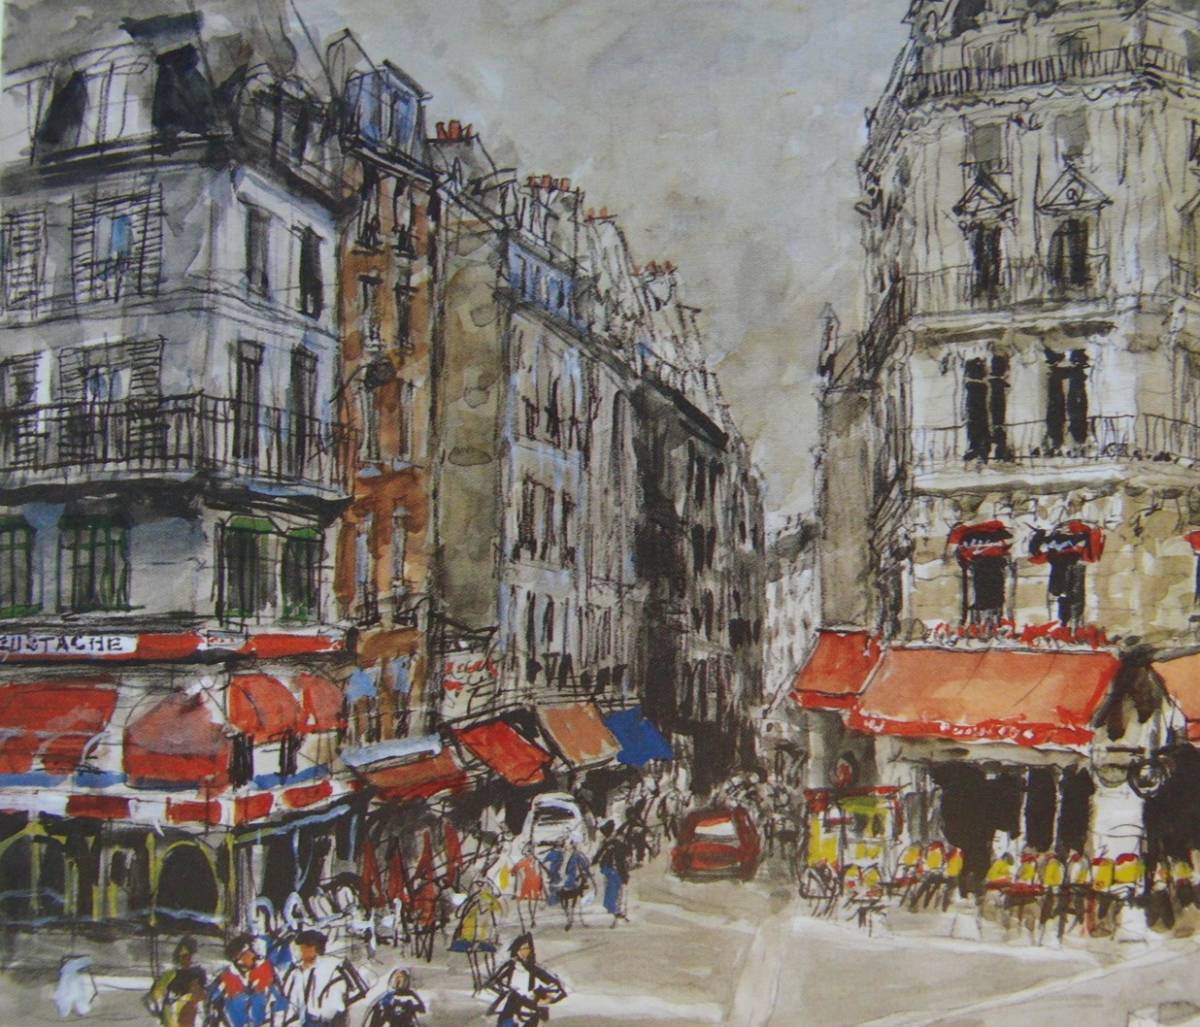 Yukio Kodama, City of Les Halles, Popular works, Europe, Landscape, Rare art books and framed paintings, New high-quality frame included, In good condition, free shipping, Artwork, Painting, Portraits